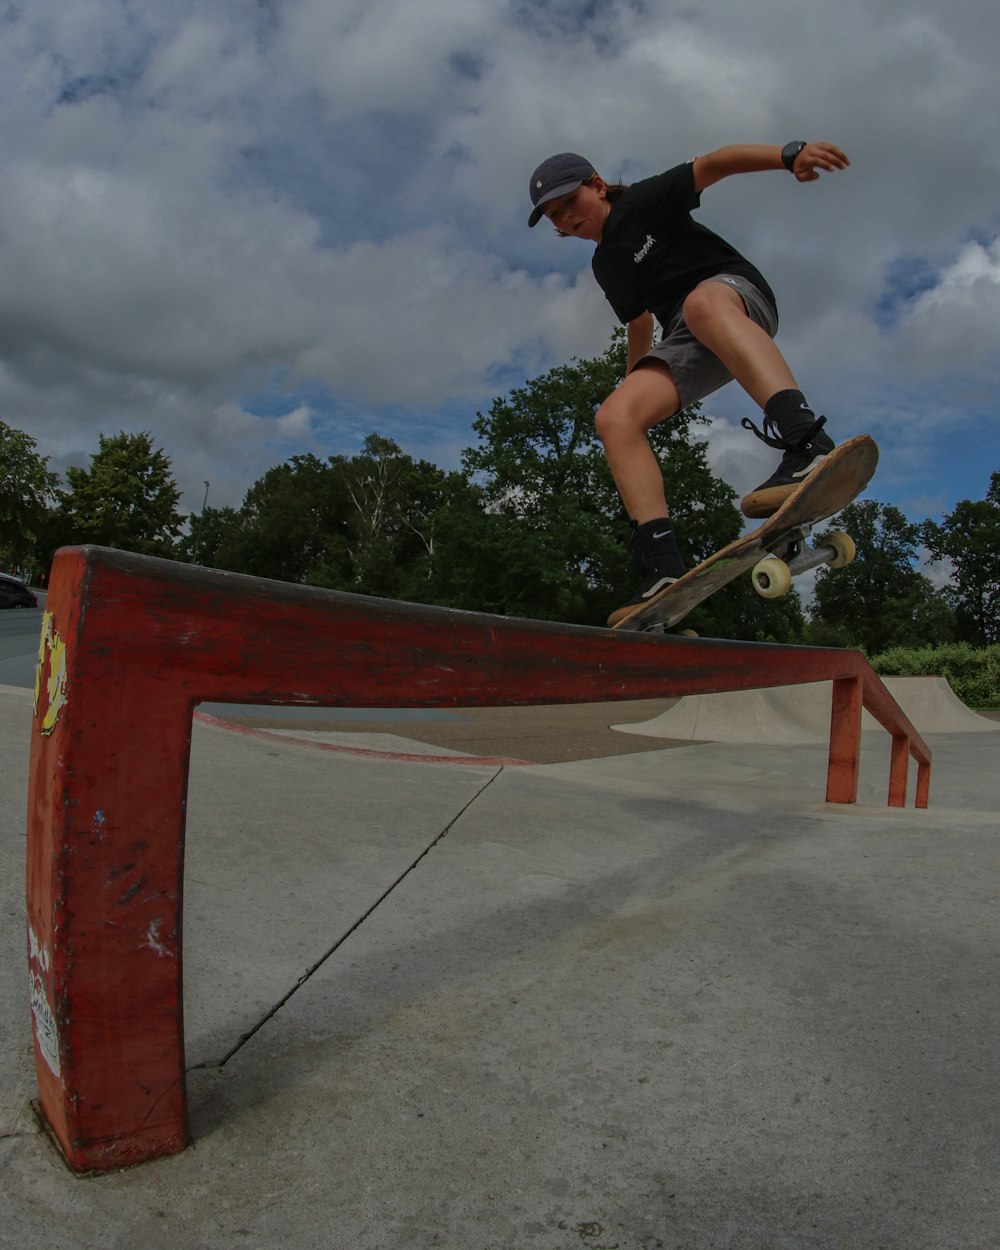 man in black shirt and black shorts doing skateboard stunts on mid air during daytime